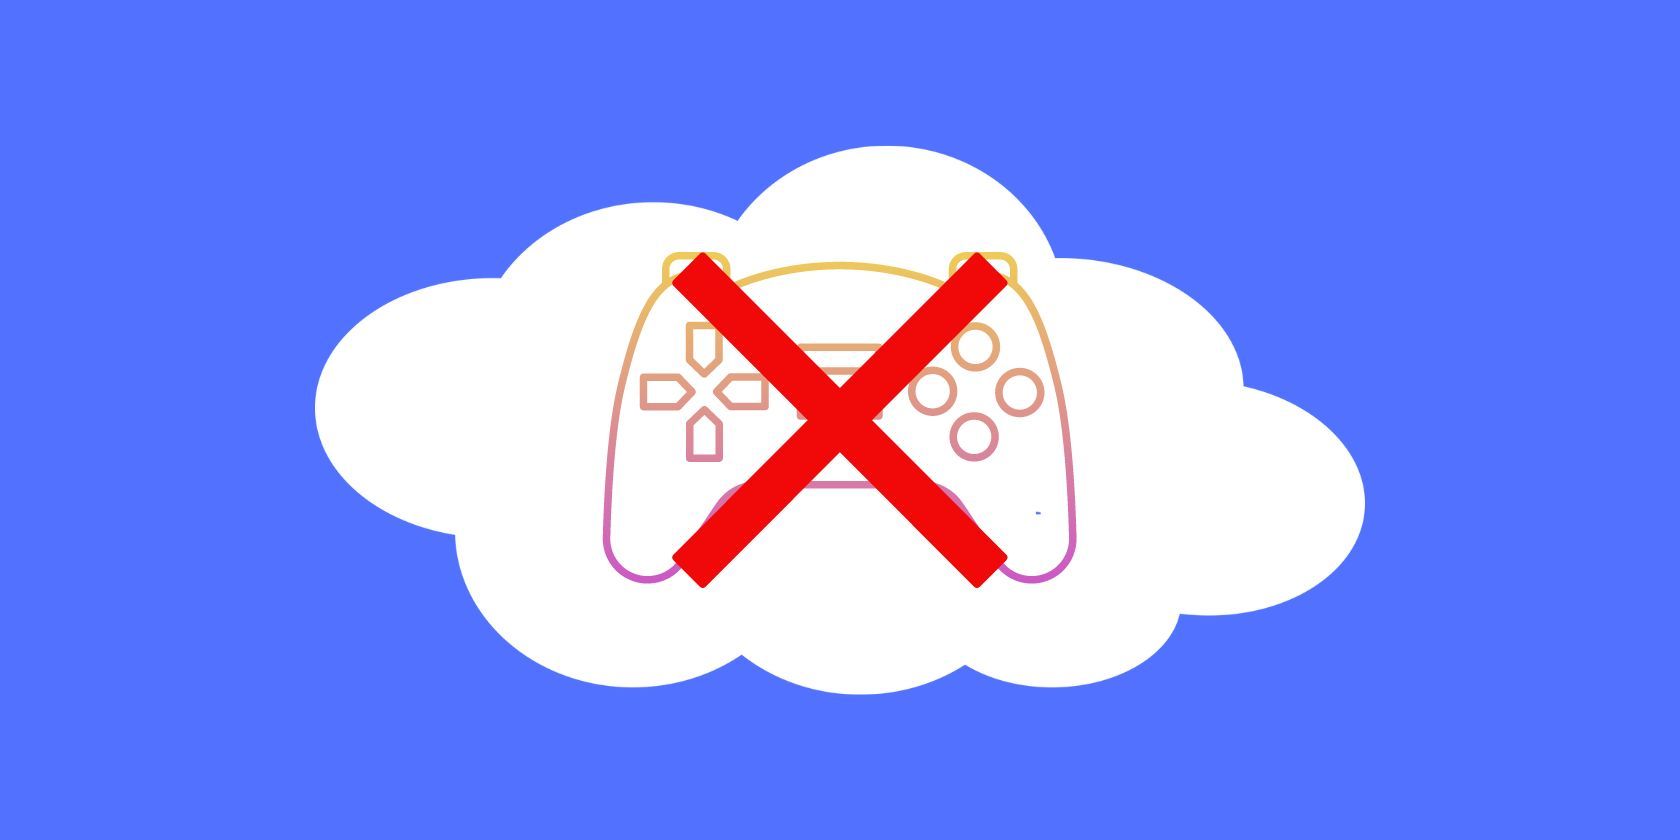 A vector of a cloud with a game controller inside it and a red cross over the top of it over a blue background